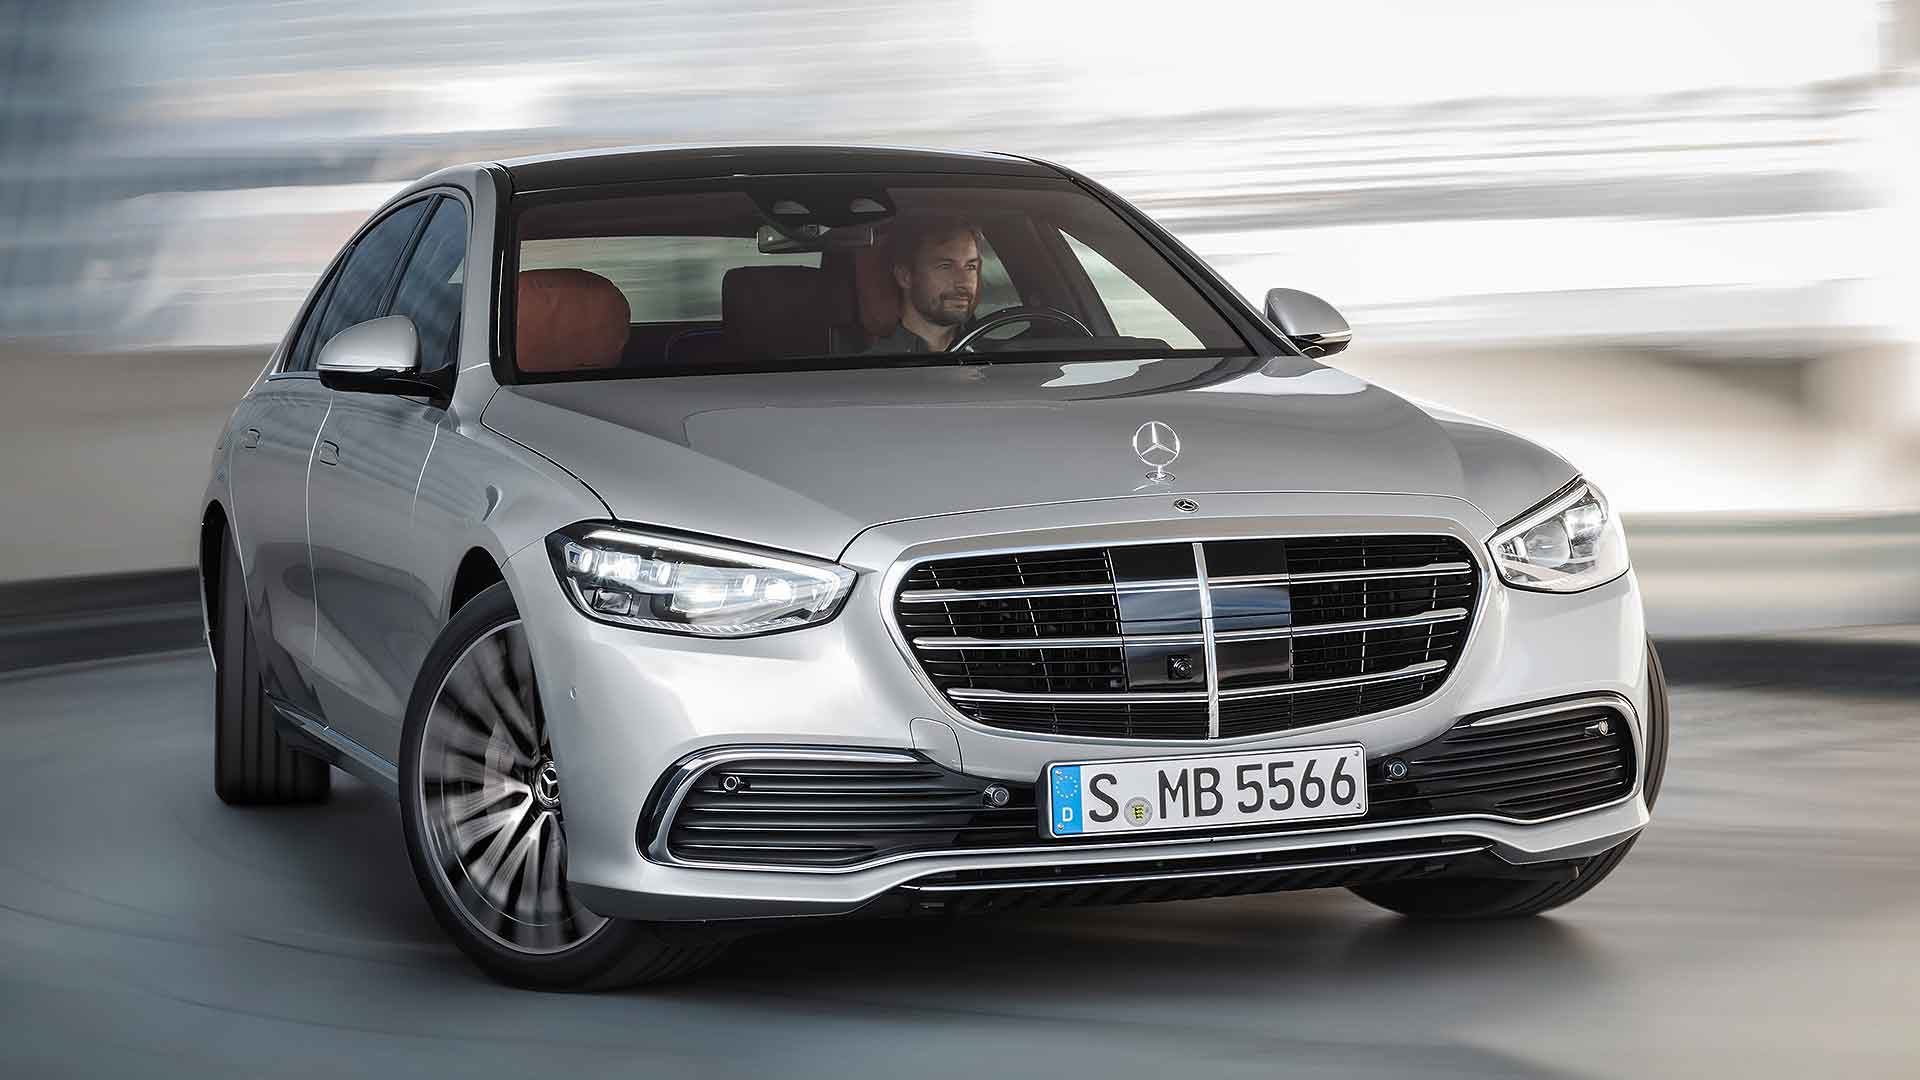 Mercedes Benz S Class News, Prices And Specs Confirmed